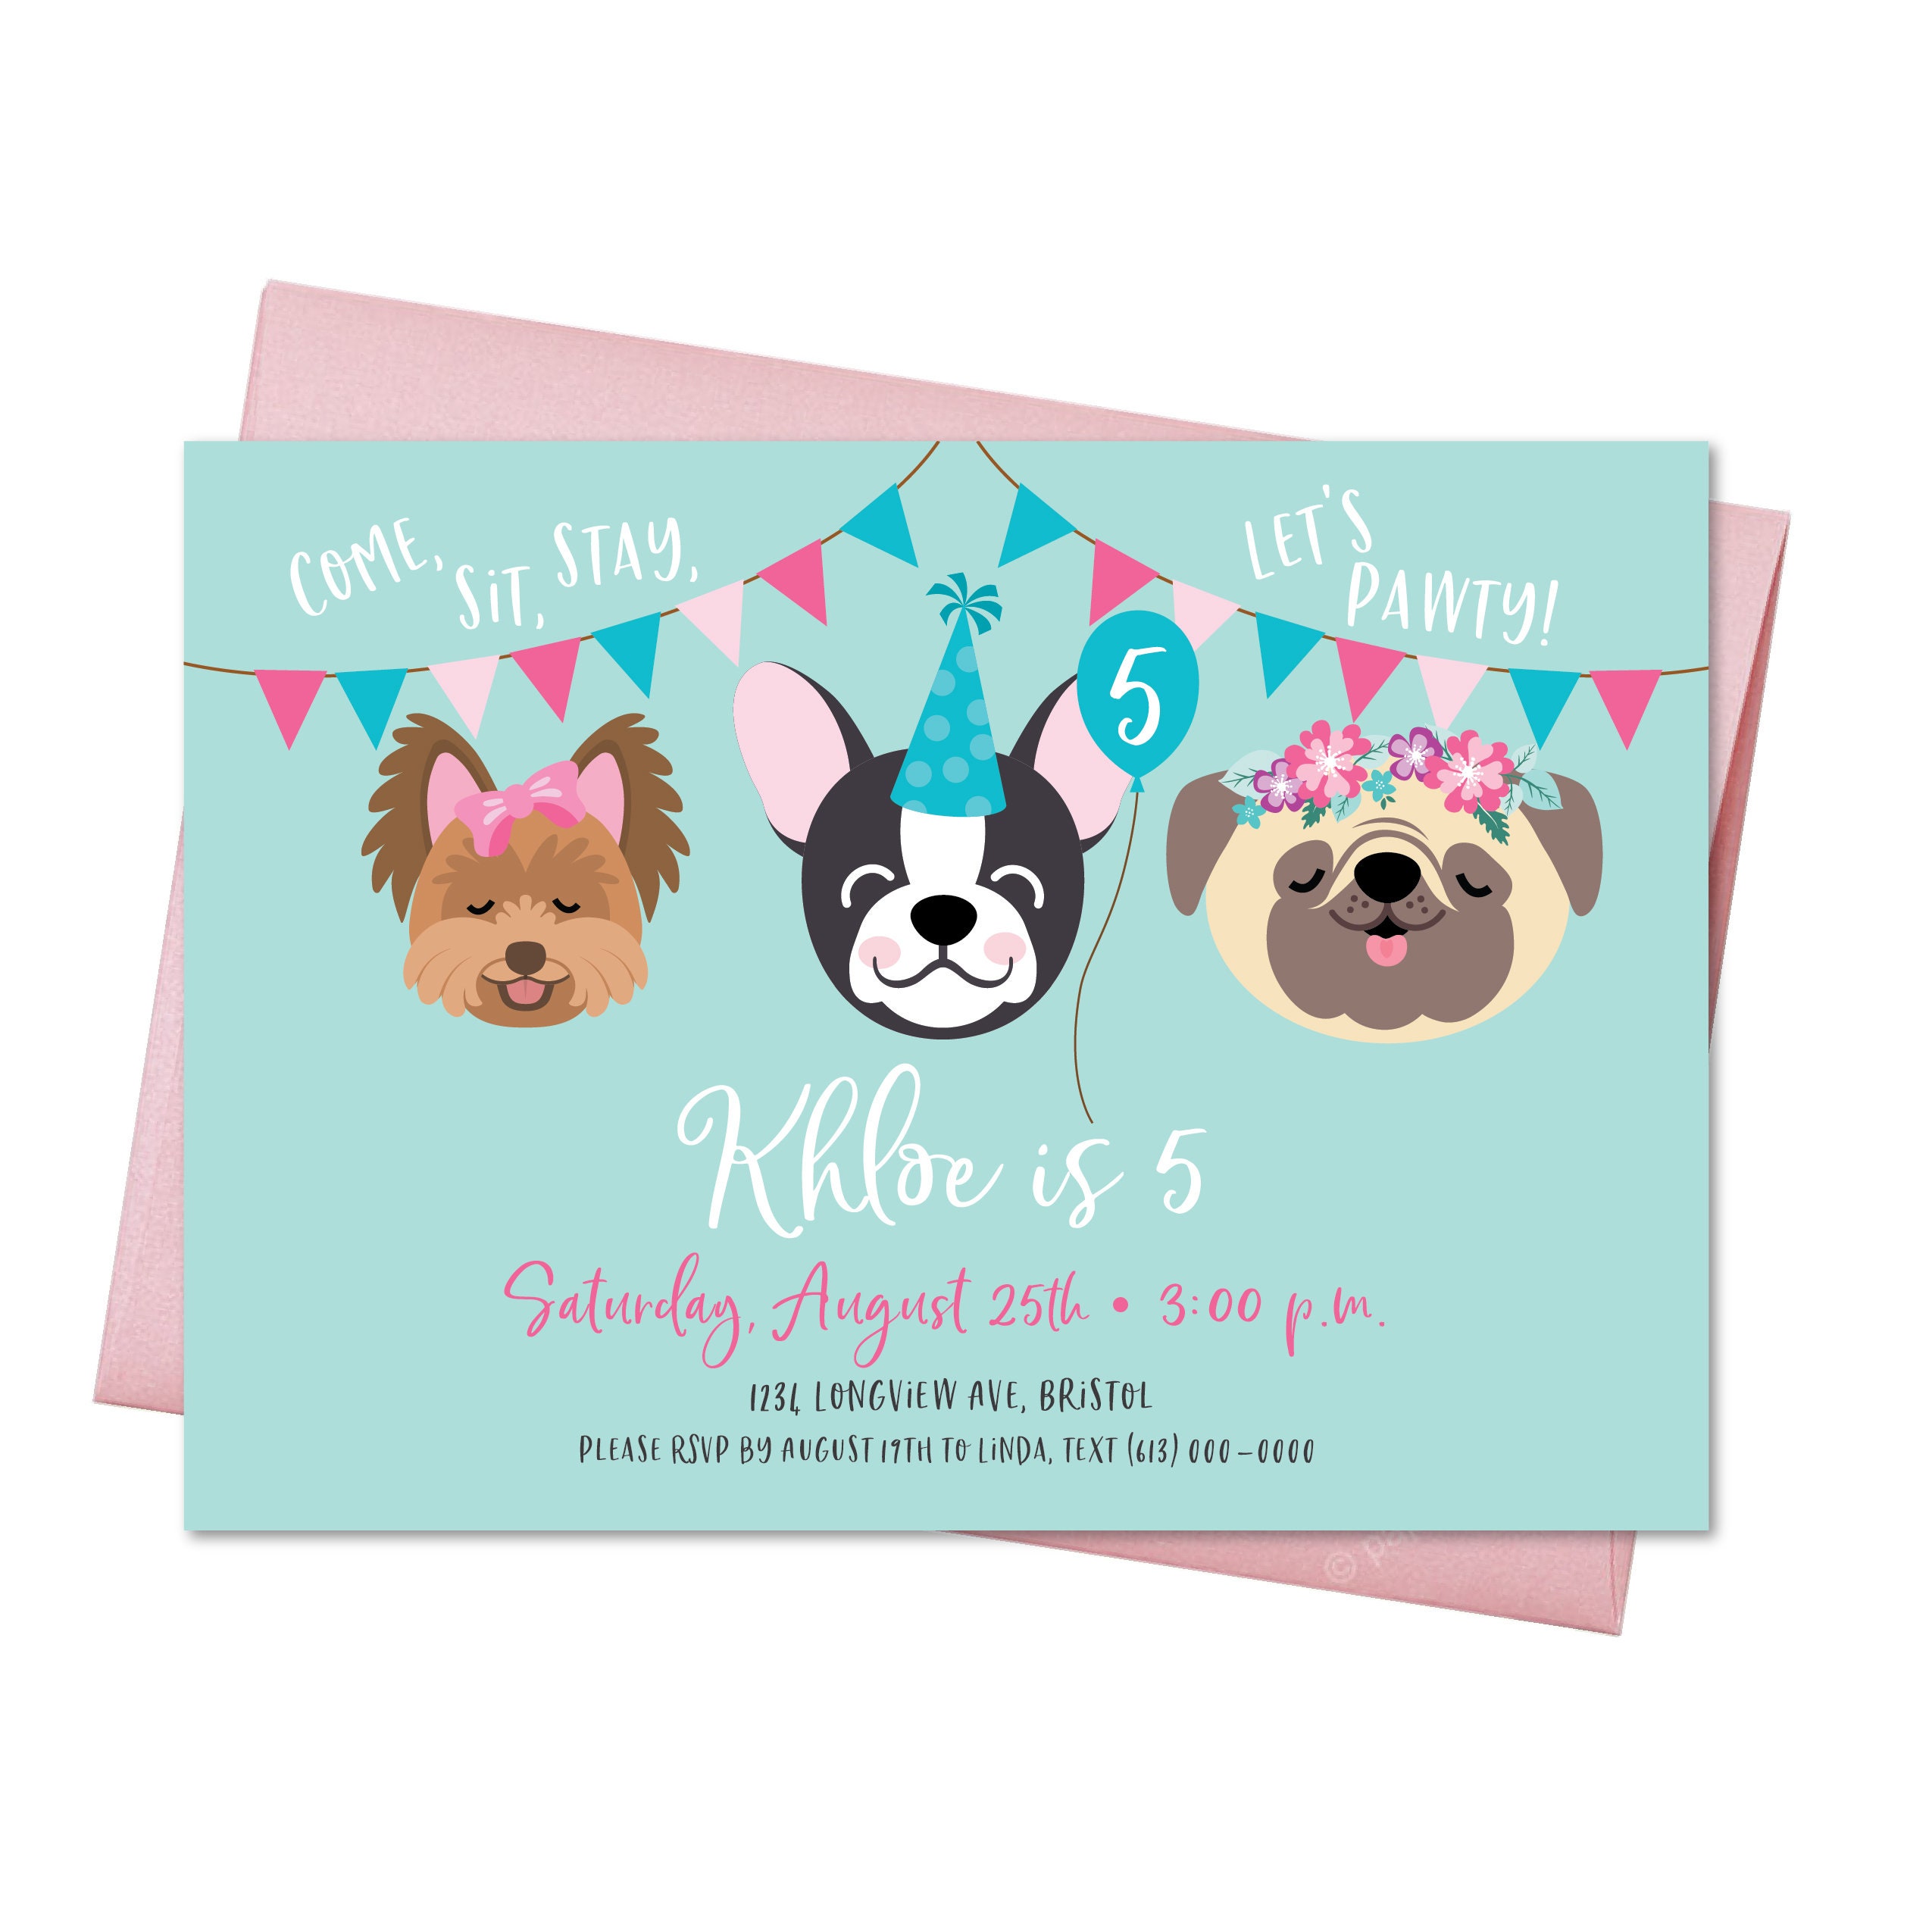 33-dog-birthday-party-invitations-images-free-invitation-template